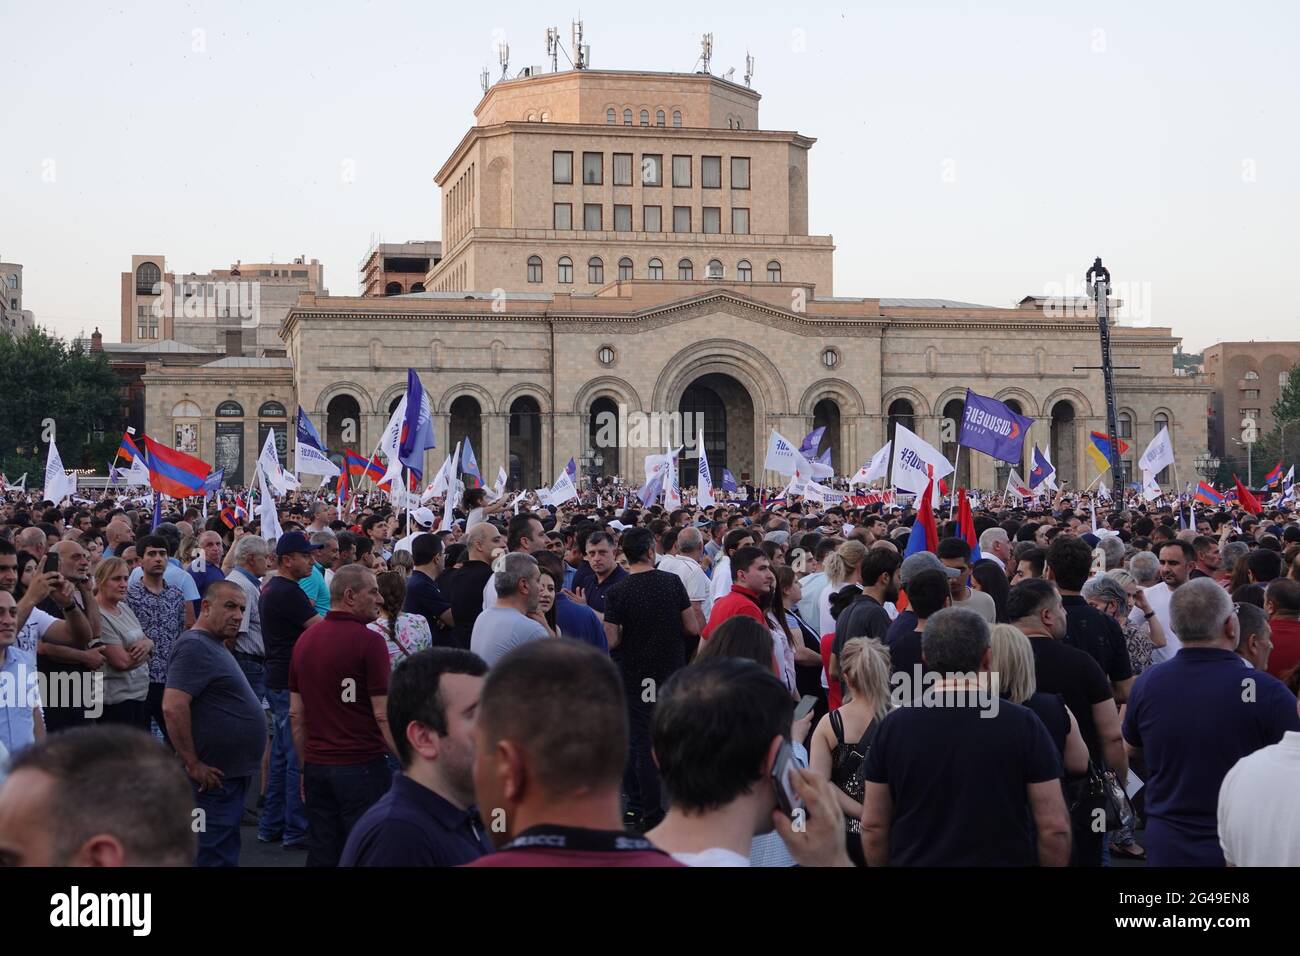 Eriwan, Armenia. 18th June, 2021. Supporters of former President Kocharian take part in a rally on Republic Square. Seven months after the war over the conflict region of Nagorno-Karabakh, the crisis-ridden South Caucasus republic of Armenia will hold an early parliamentary election on June 20, 2021. It is expected that the Civic Contract party and the Armenian Bloc around Kocharian will decide the race for the strongest power between themselves. Credit: Ulf Mauder/dpa/Alamy Live News Stock Photo